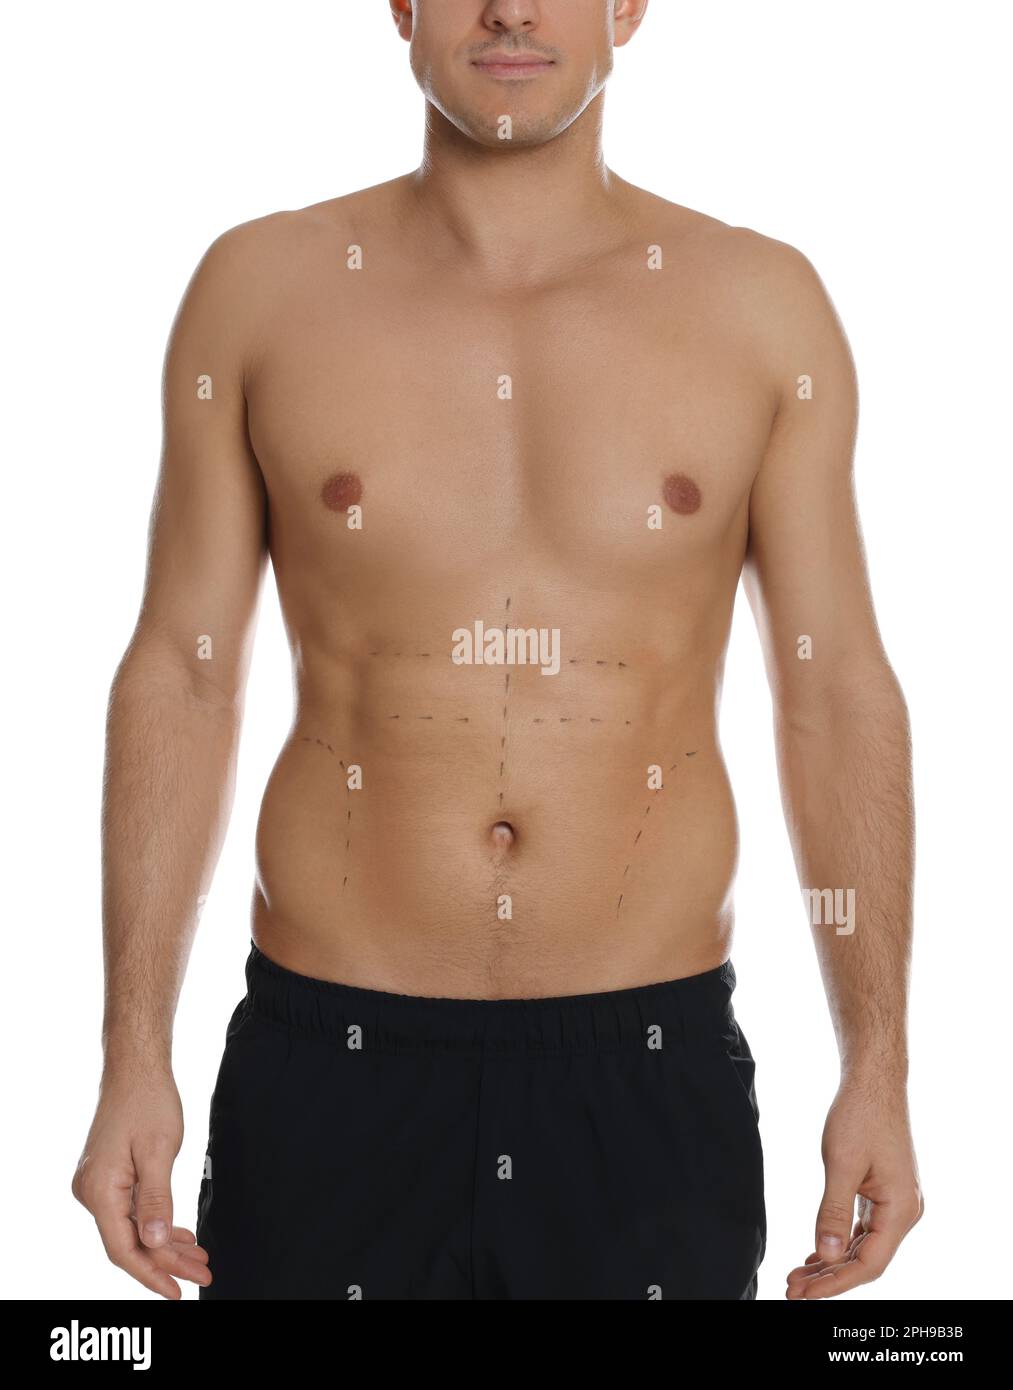 Fit man with marks on body against white background, closeup. Weight loss surgery Stock Photo